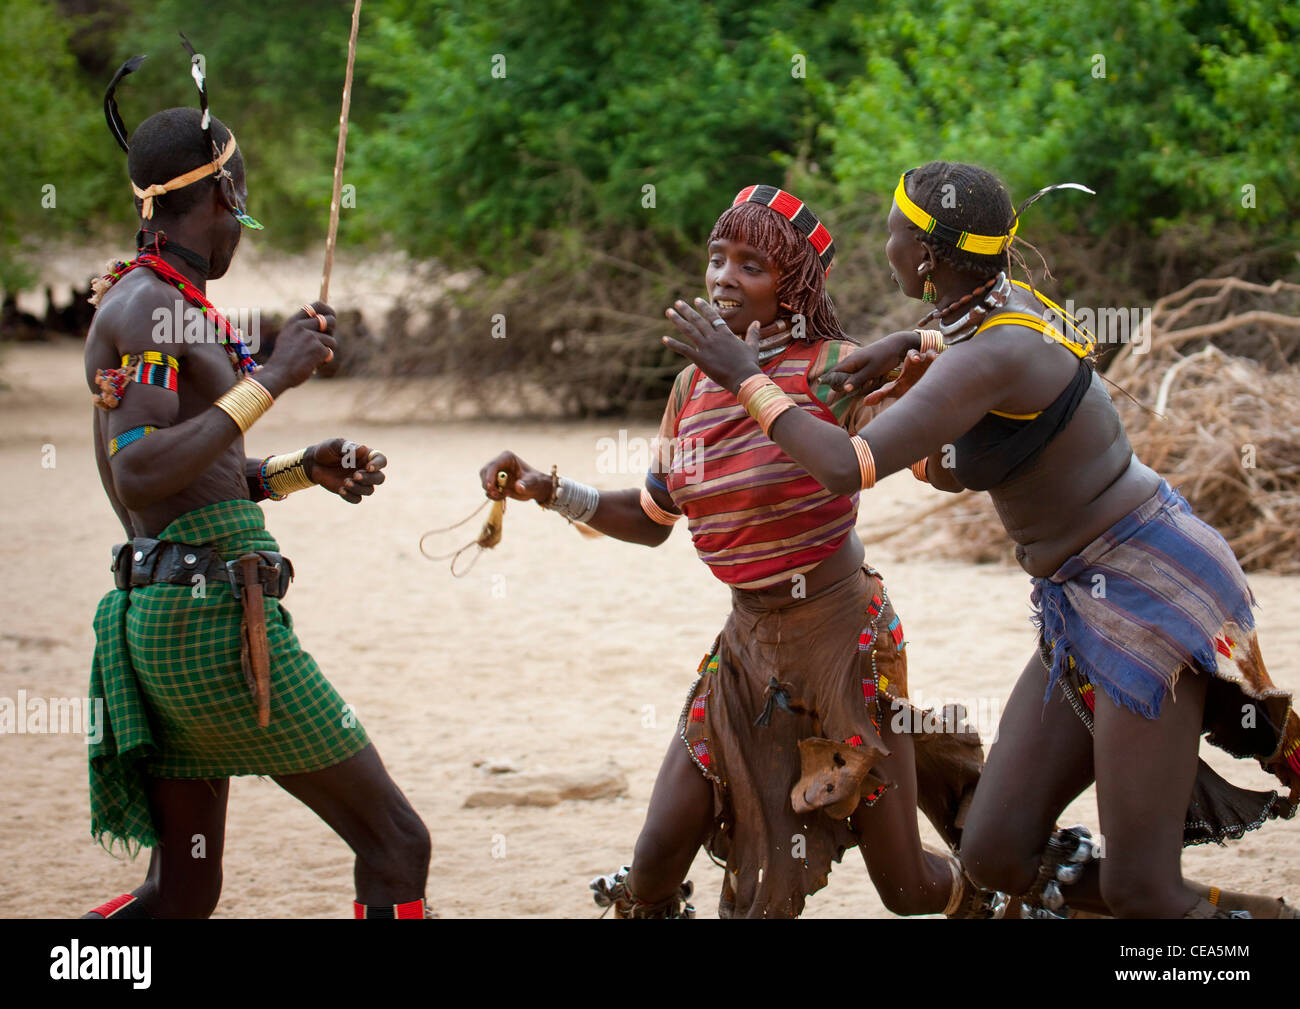 Hamer Woman Fighting To Be Flogged First By Great Whipper During Celebration Bull Jumping Ceremony Ethiopia Stock Photo